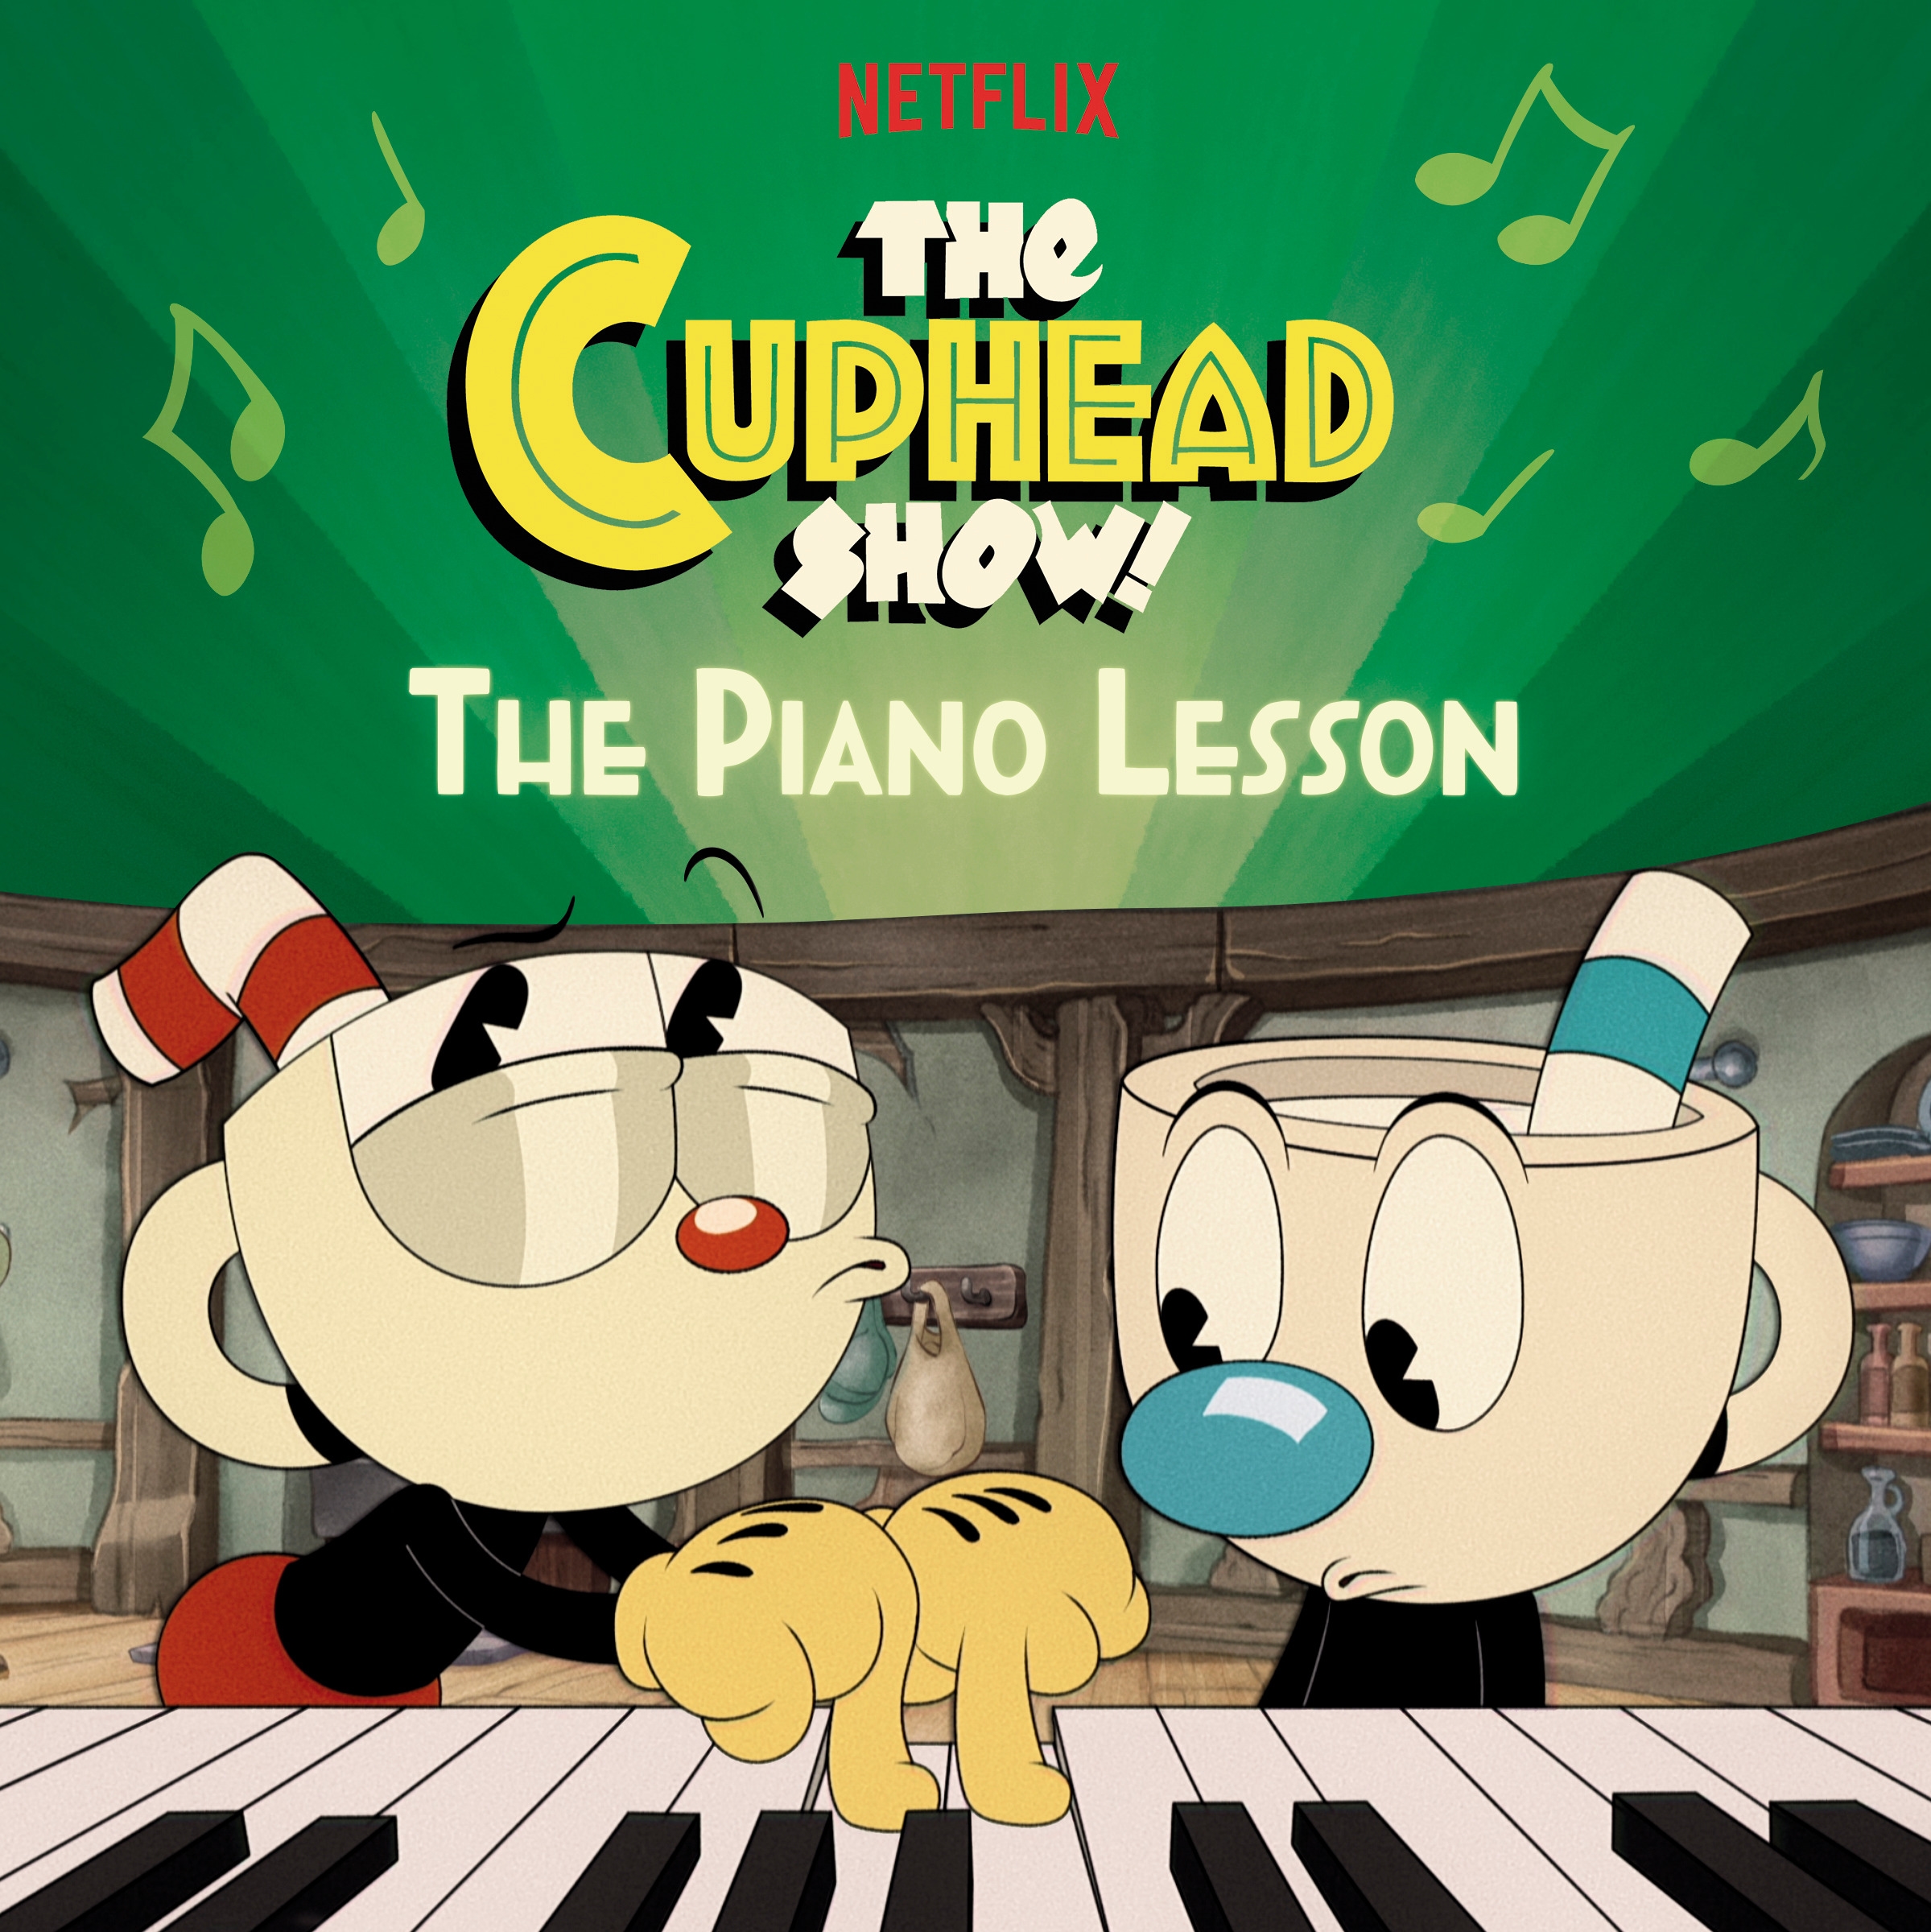 The Piano Lesson (The Cuphead Show!) by Billy Wrecks - Penguin